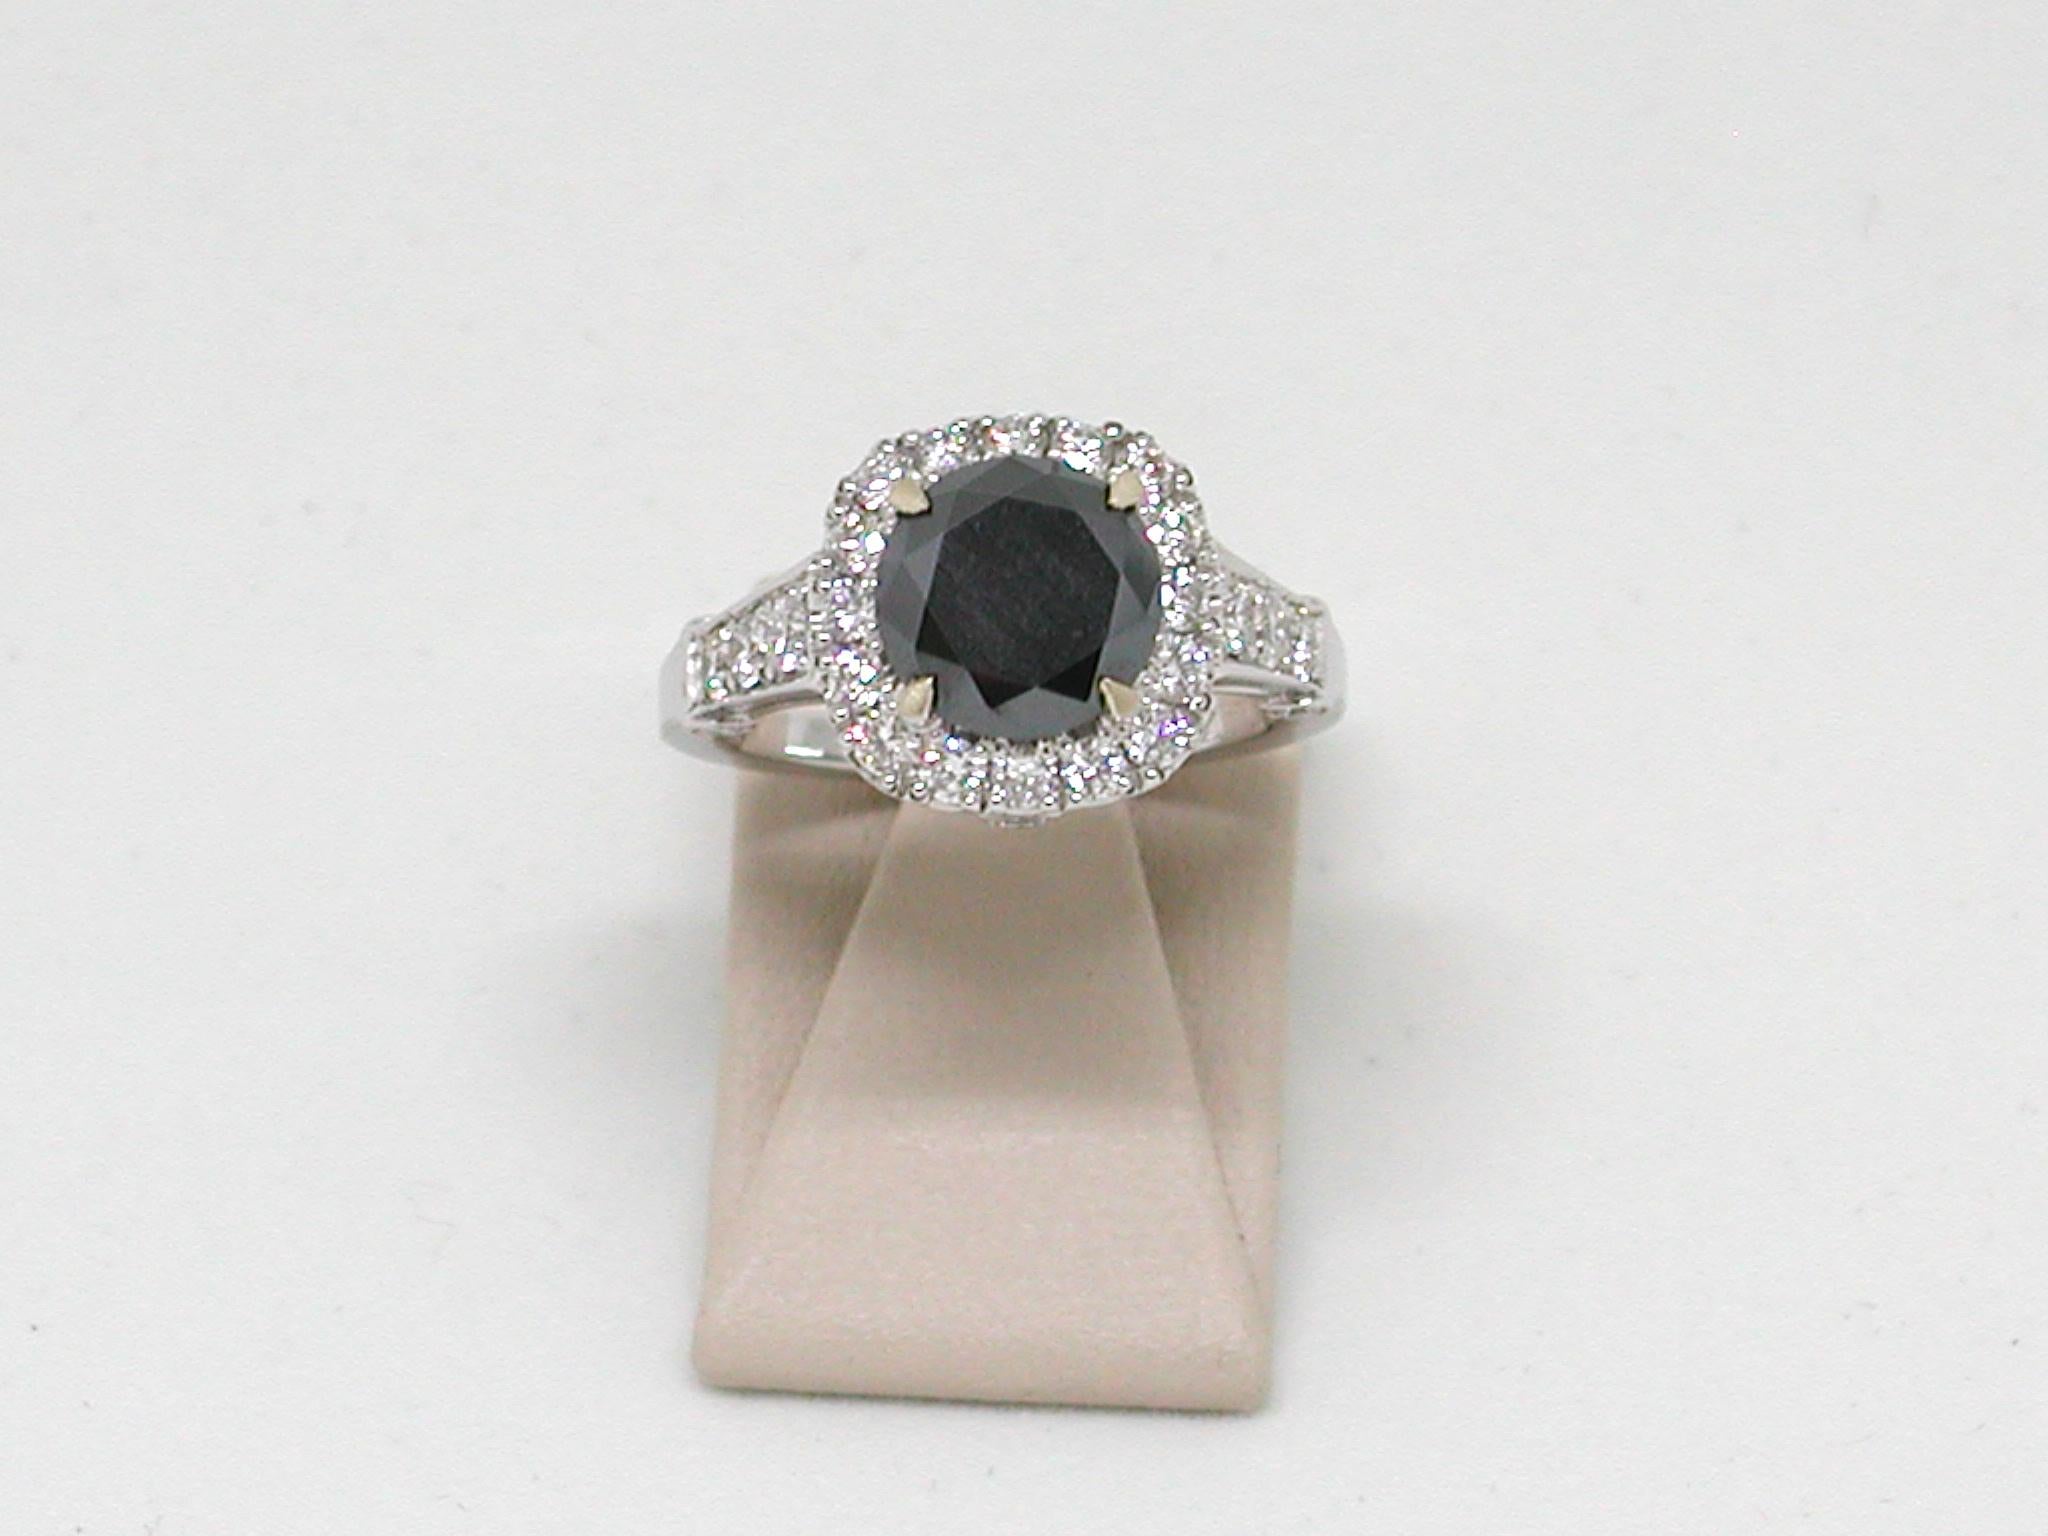 Gold: 18 kt yellow gold 
Weight: 6.95 g 
Black Diamond: 2.50 ct. Natural Fancy Black
White Diamonds: 0.90 ct. F / VS1
Width: 1.20 cm 
Ring size: adjustable up to size 70, free of charge 
All our jewellery comes with a certificate appraisal and 5